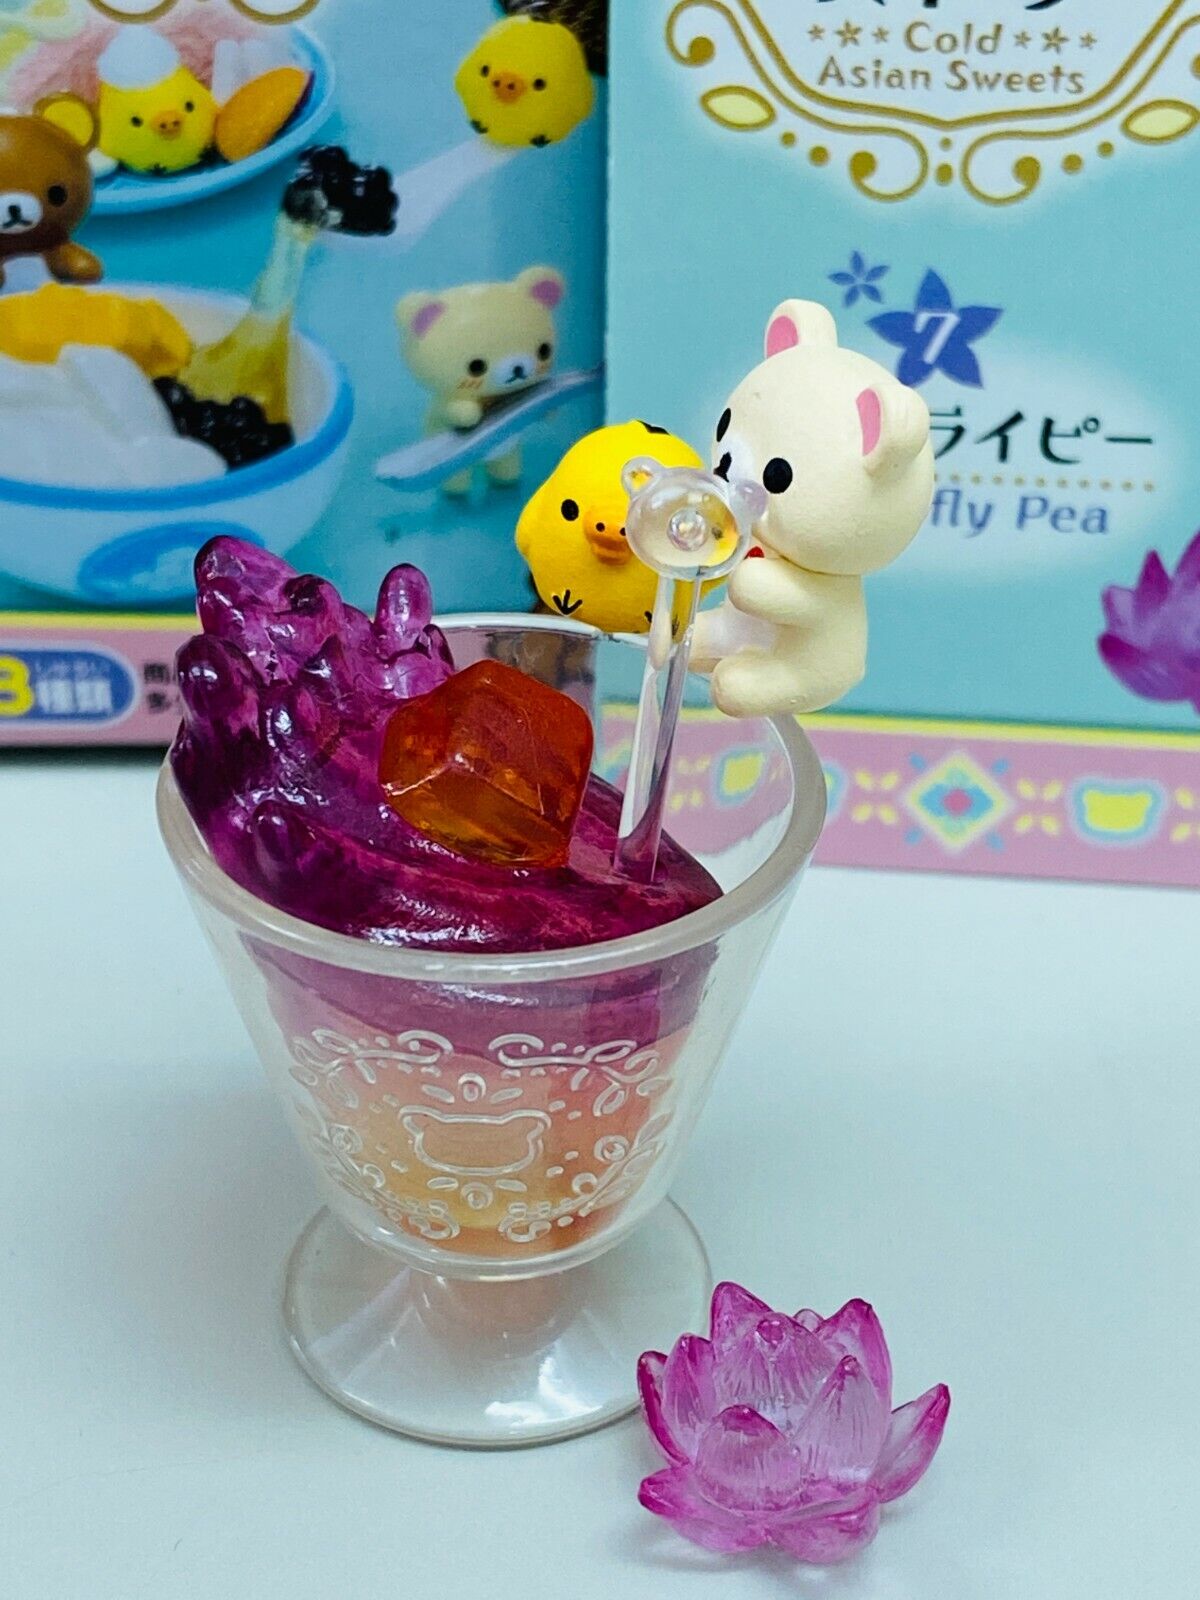 New Re-Ment San-X Rilakkuma Cold Asian Sweets Mini Toy Figure 7. Butterfly Pea